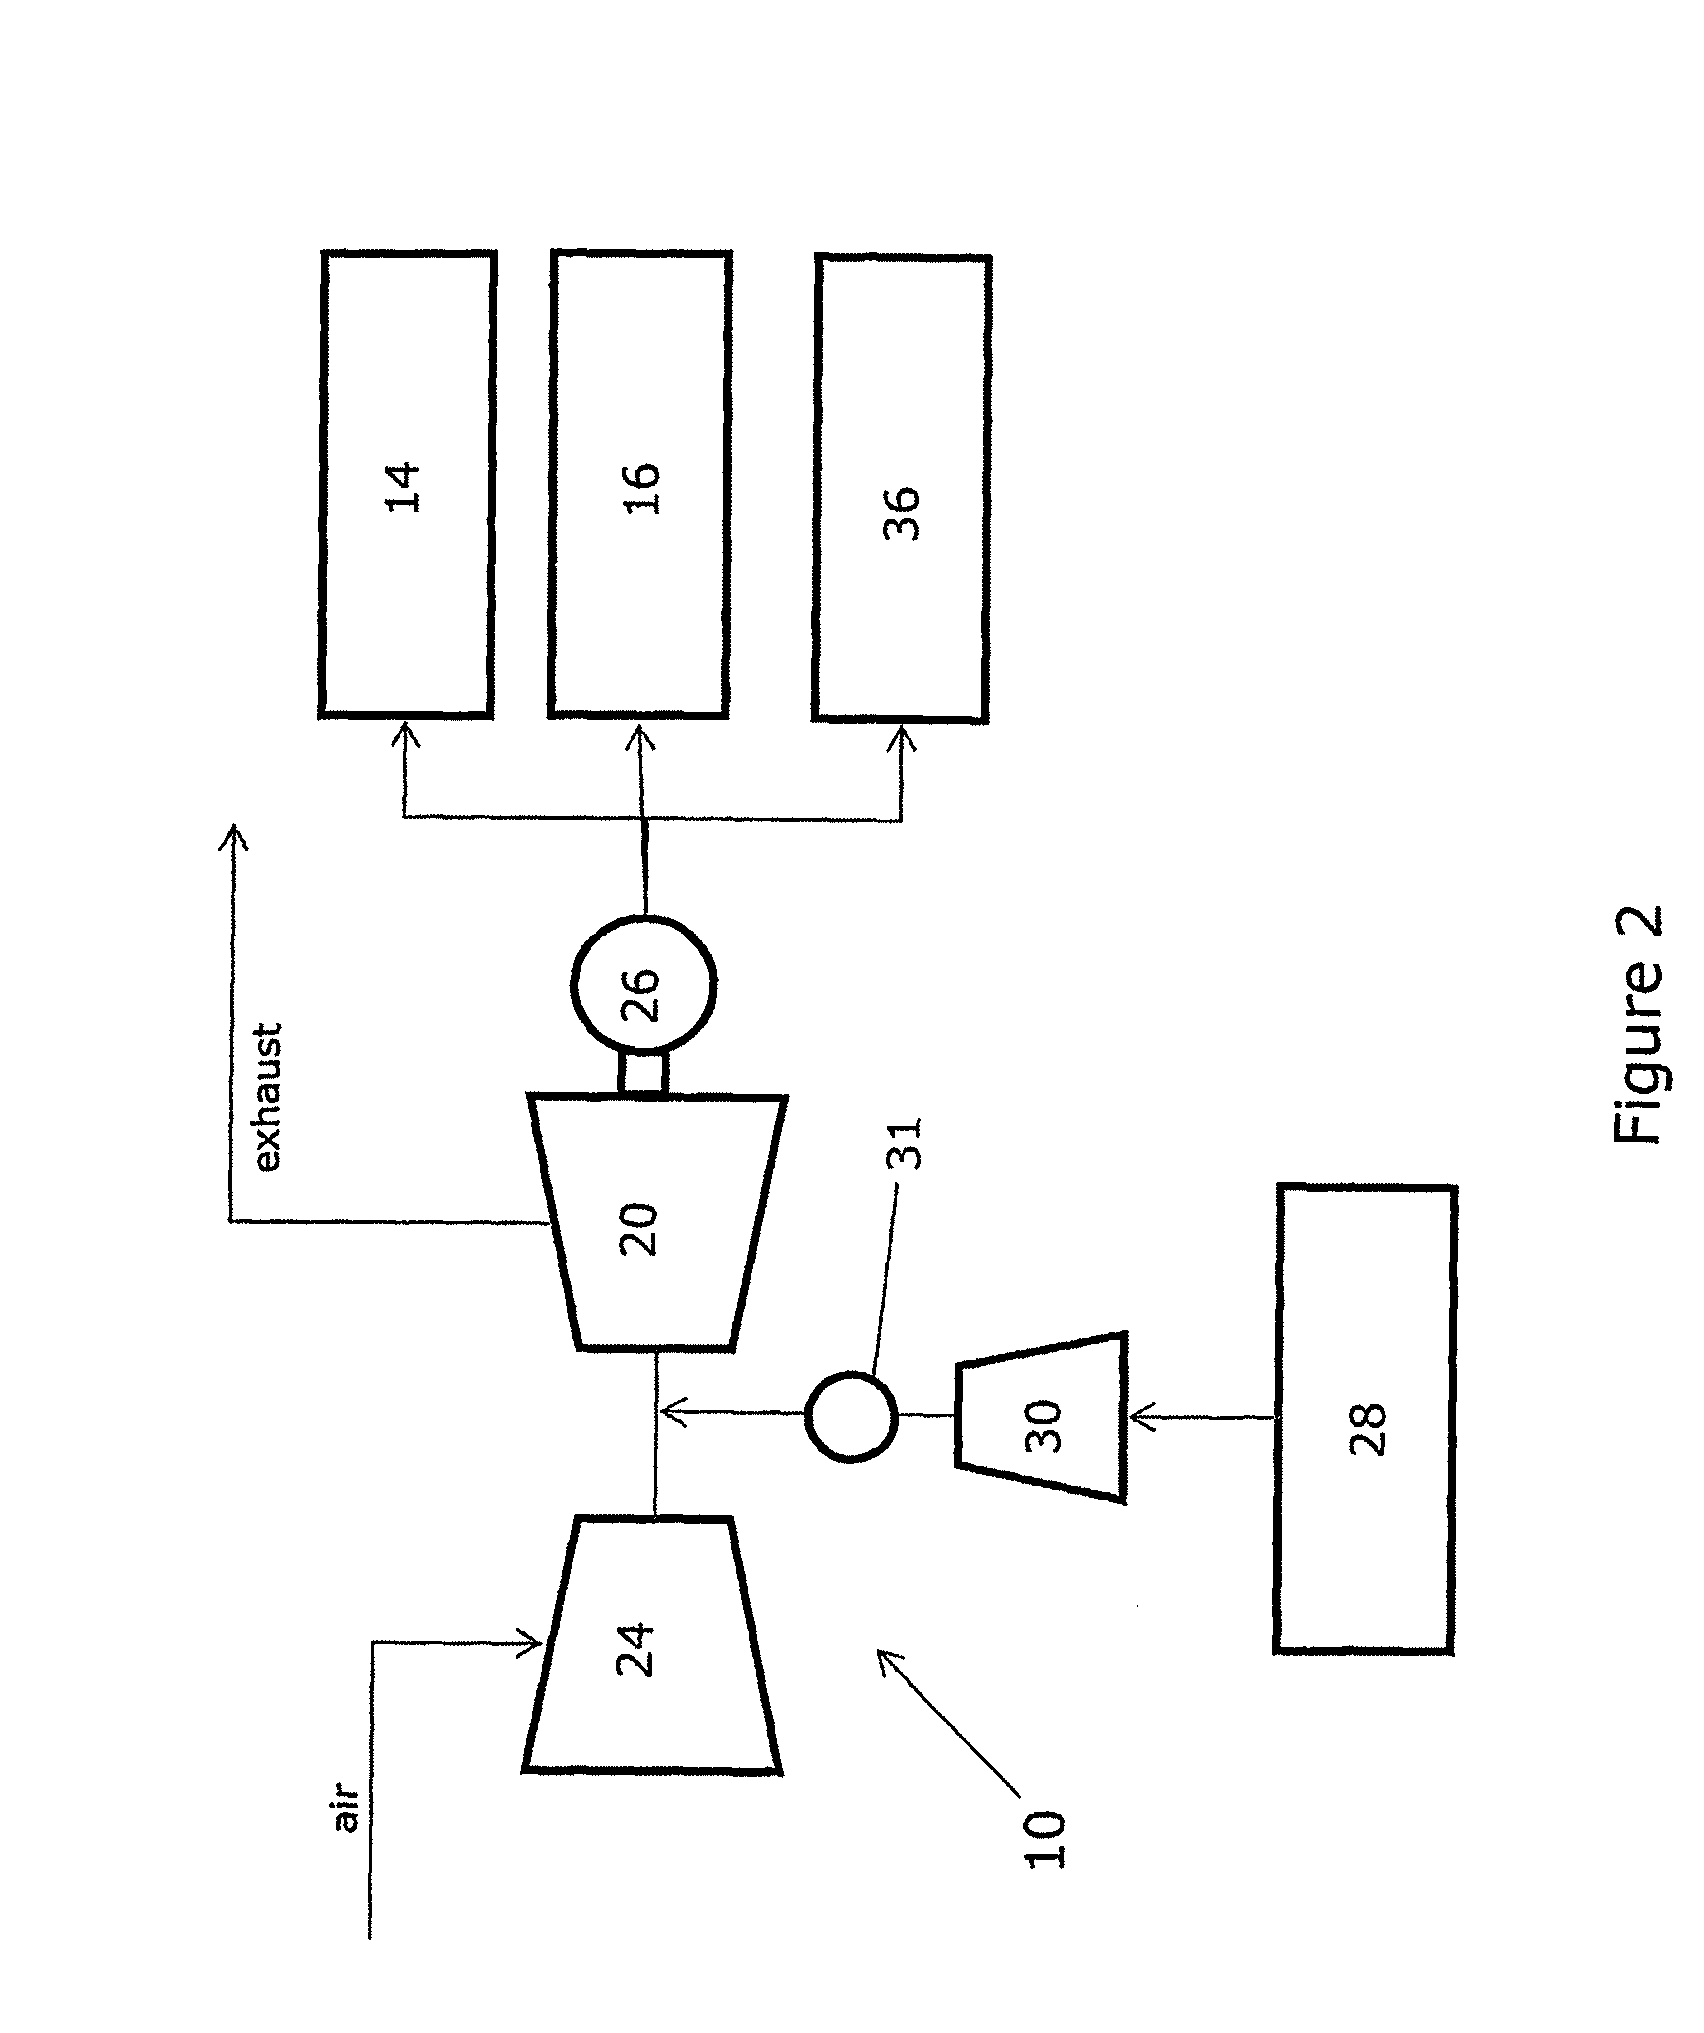 Power Generation System for a Marine Vessel